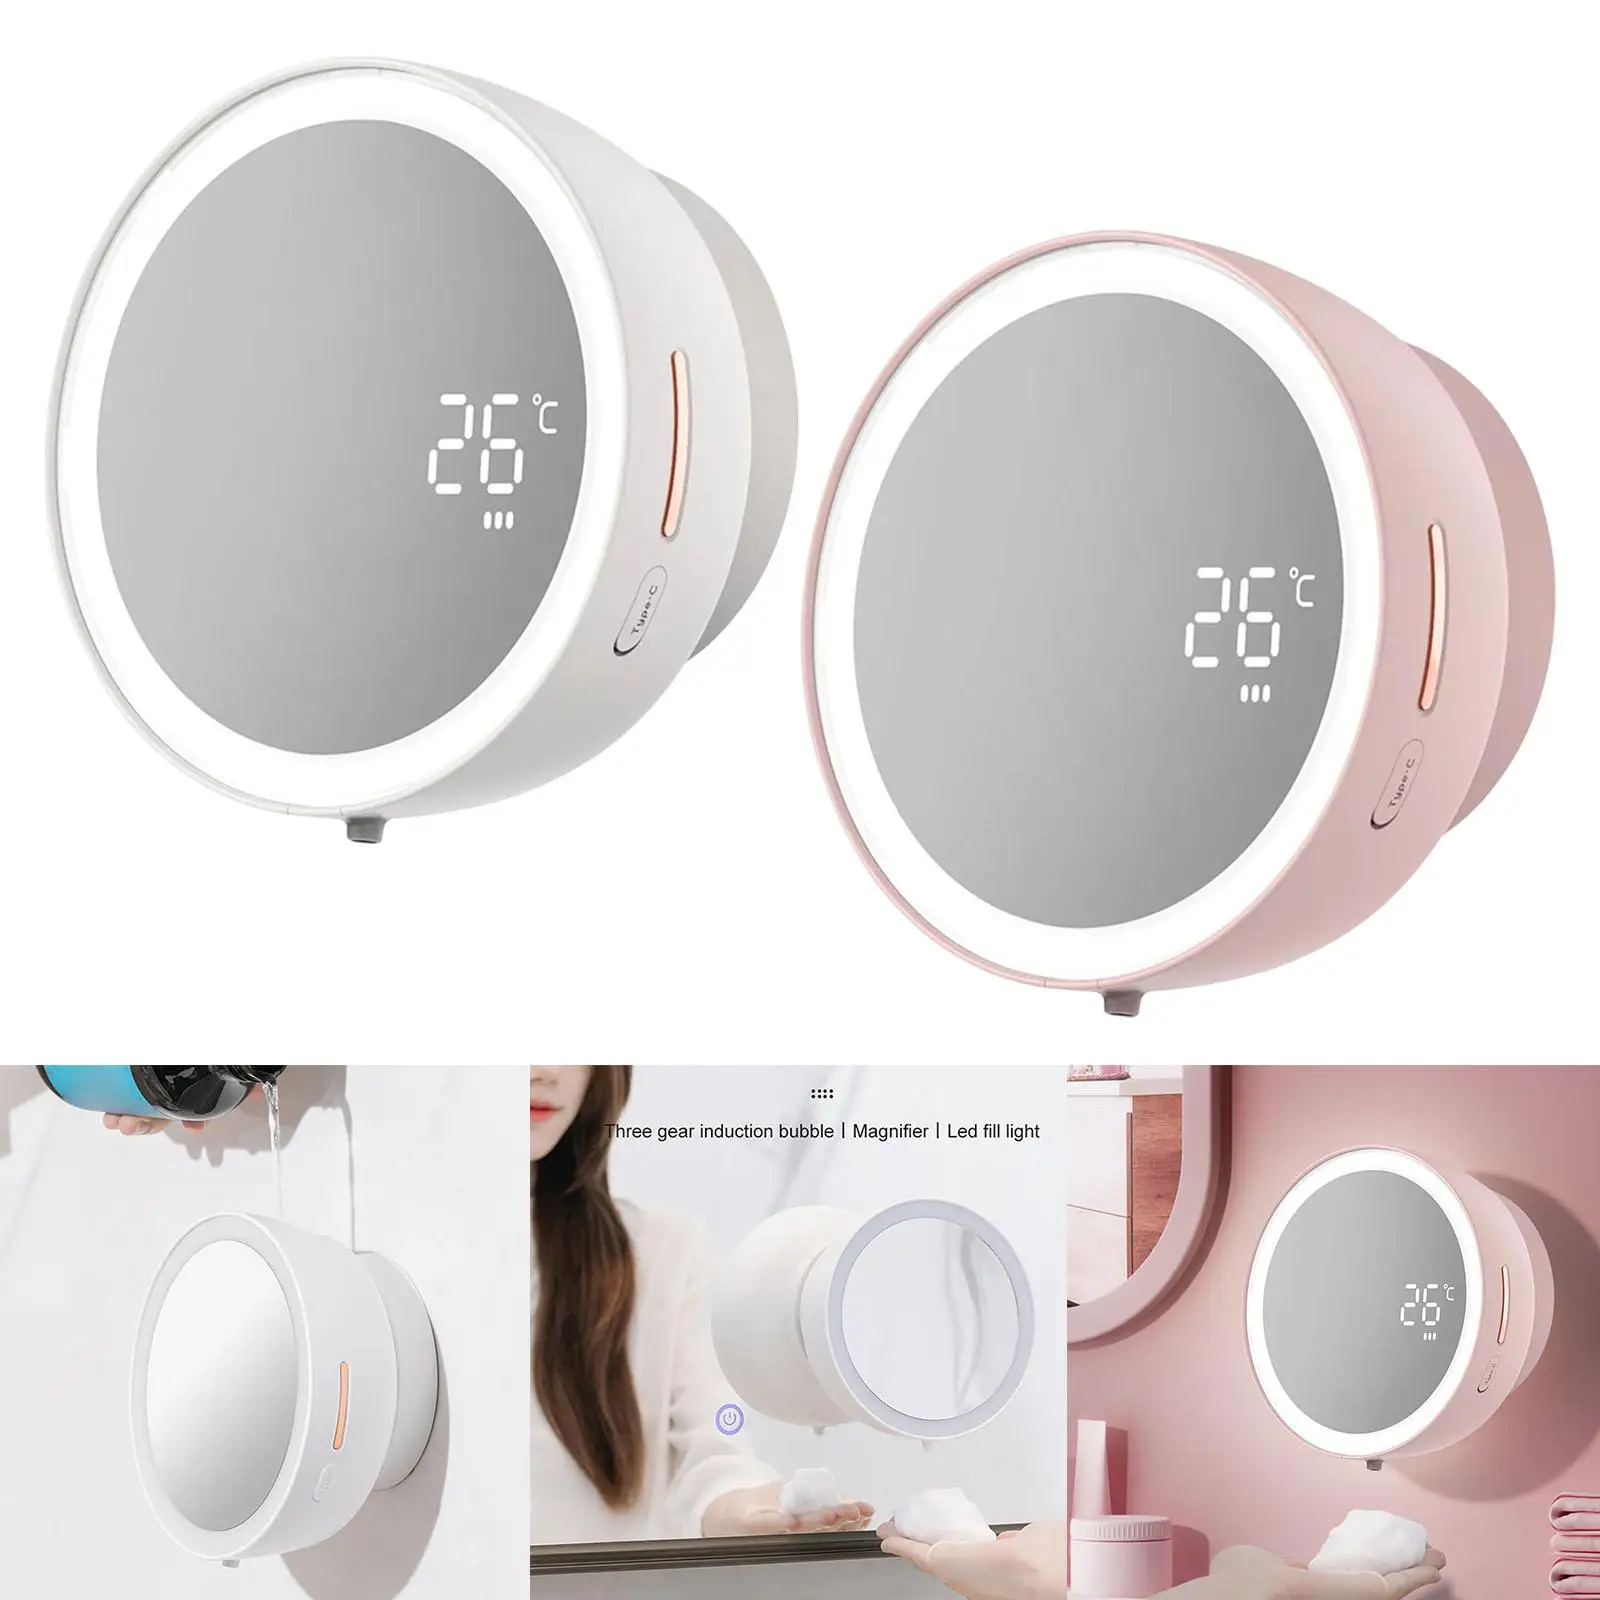 Automatic Soap Pump Dispenser Multipurpose USB Rechargeable LED Fill Lights Vanity Mirror Adjustable 285ml 3 Gear for Dorm Hotel